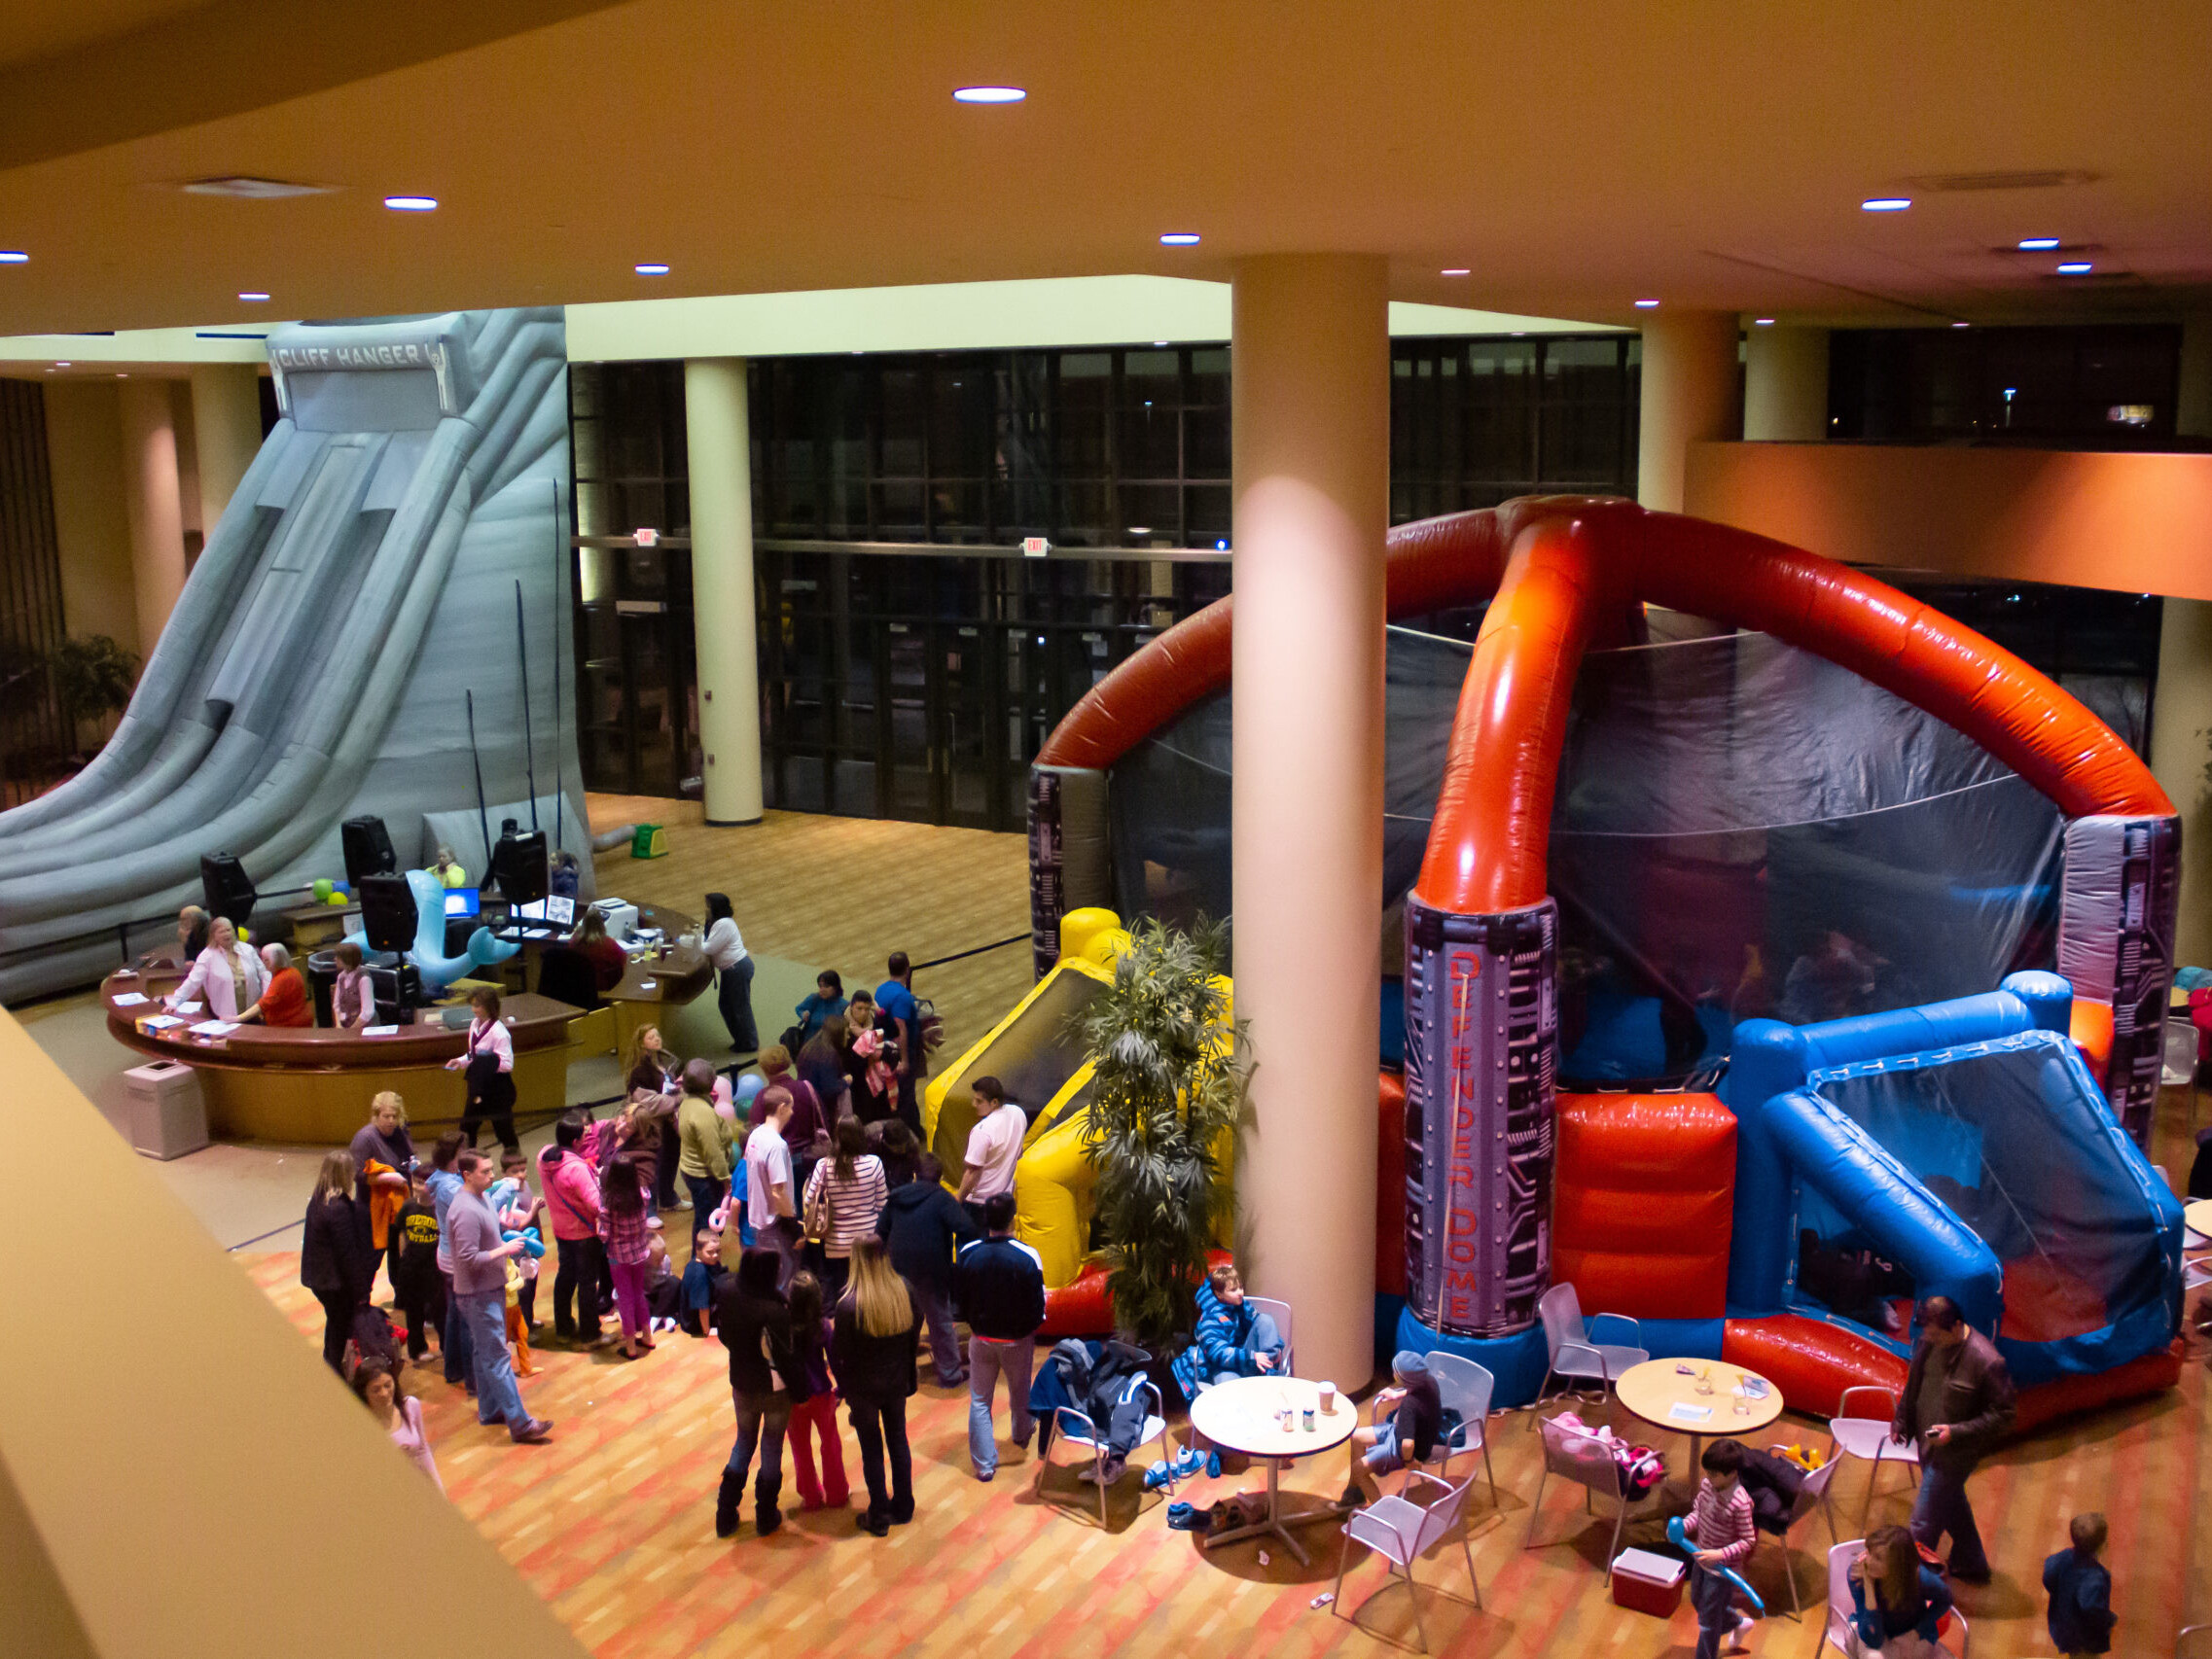 Overhead view of people inside a building talking and waiting in line to go into an inflatable soccer dome.